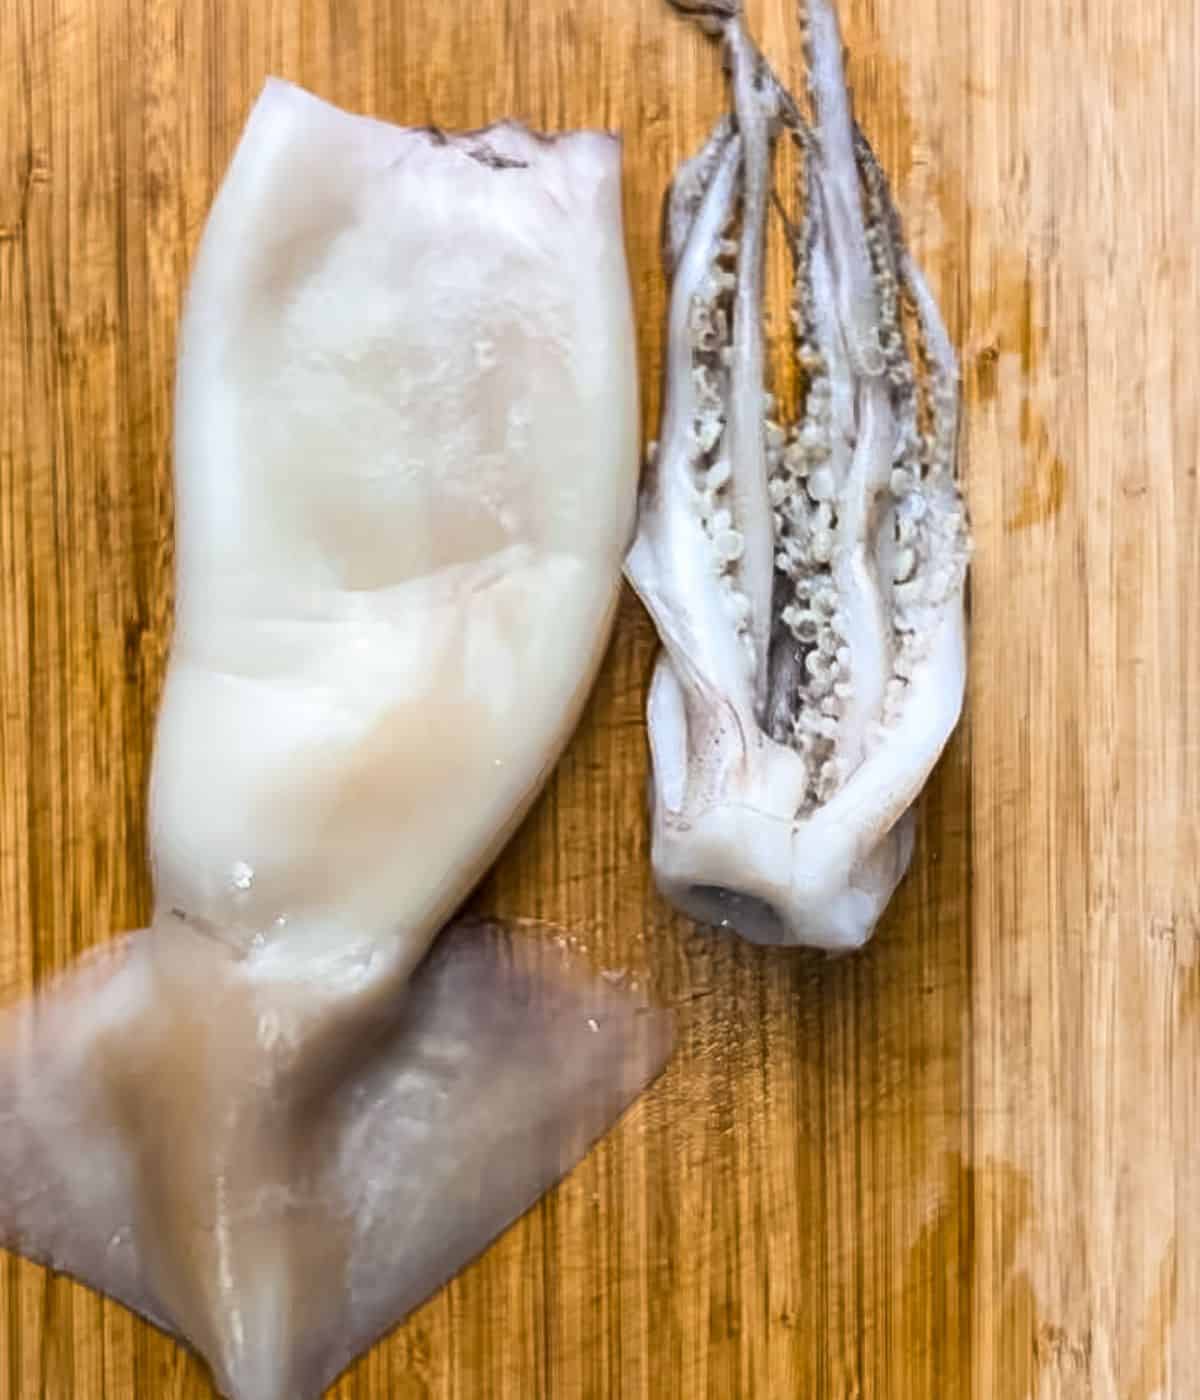 Cleaned squid on a chopping board.